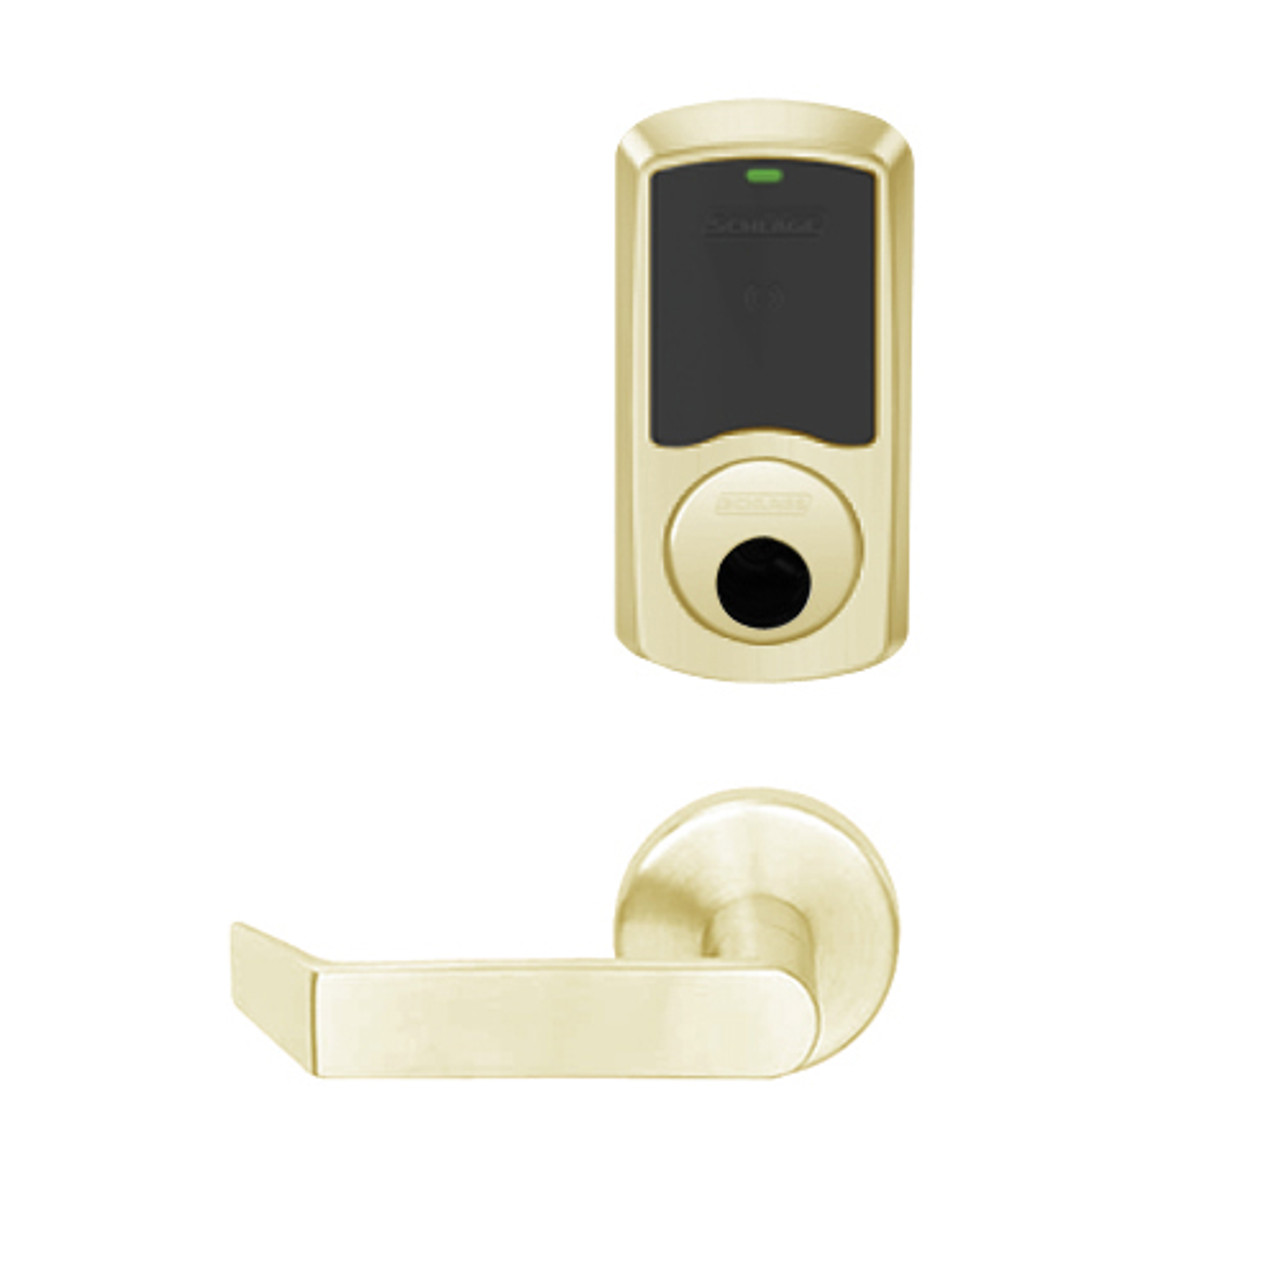 LEMD-GRW-L-06-606-00B Schlage Less Cylinder Privacy/Apartment Wireless Greenwich Mortise Deadbolt Lock with LED and Rhodes Lever in Satin Brass